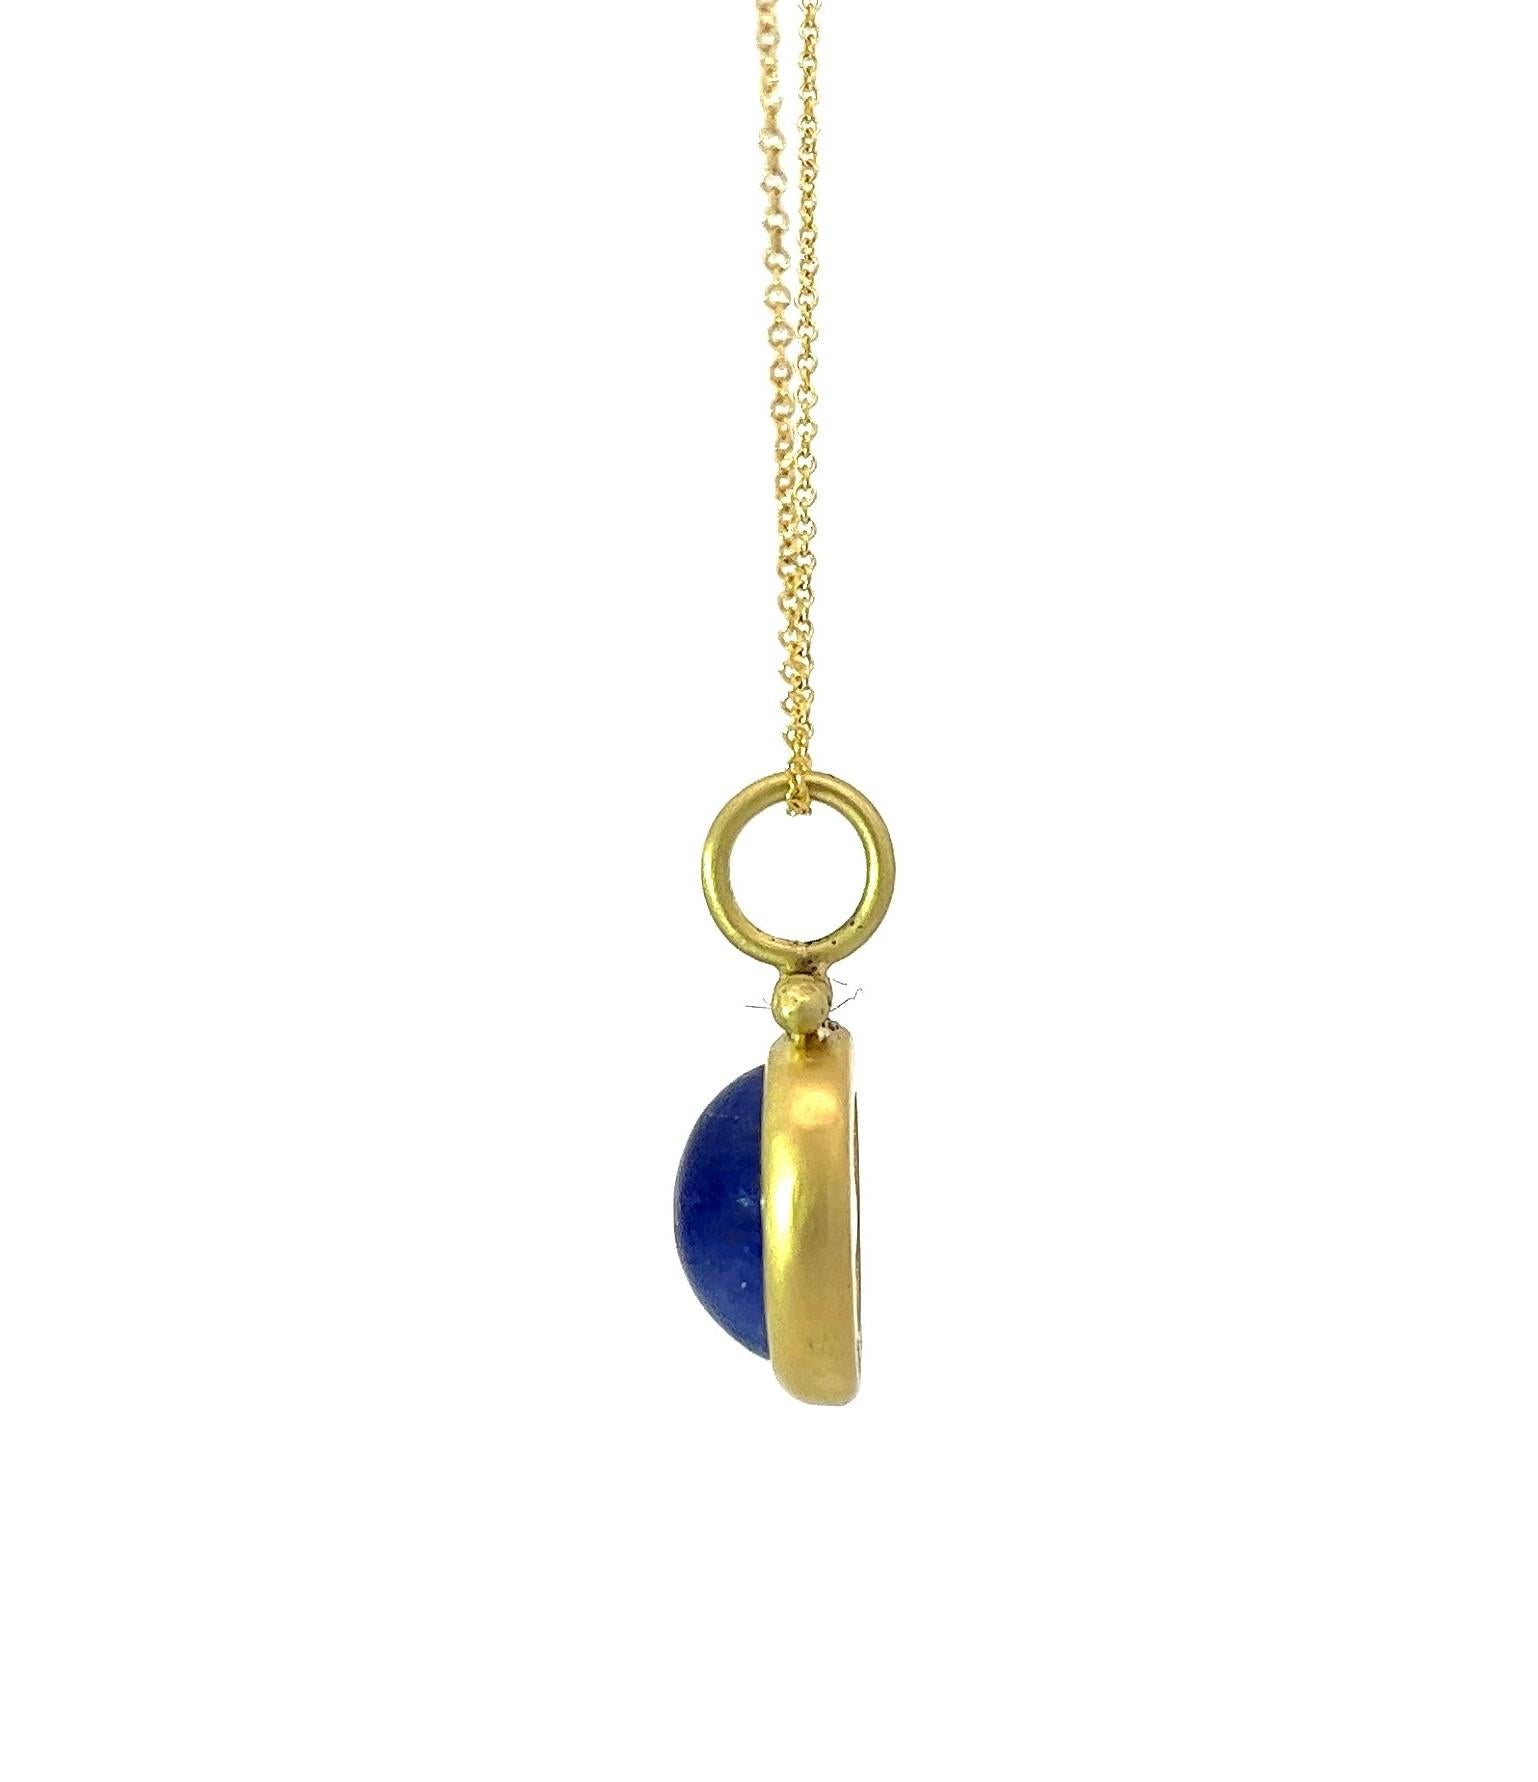 Contemporary Faye Kim 18 Karat Gold Tanzanite Cabachon Hinged Bail Pendant with Cable Chain For Sale